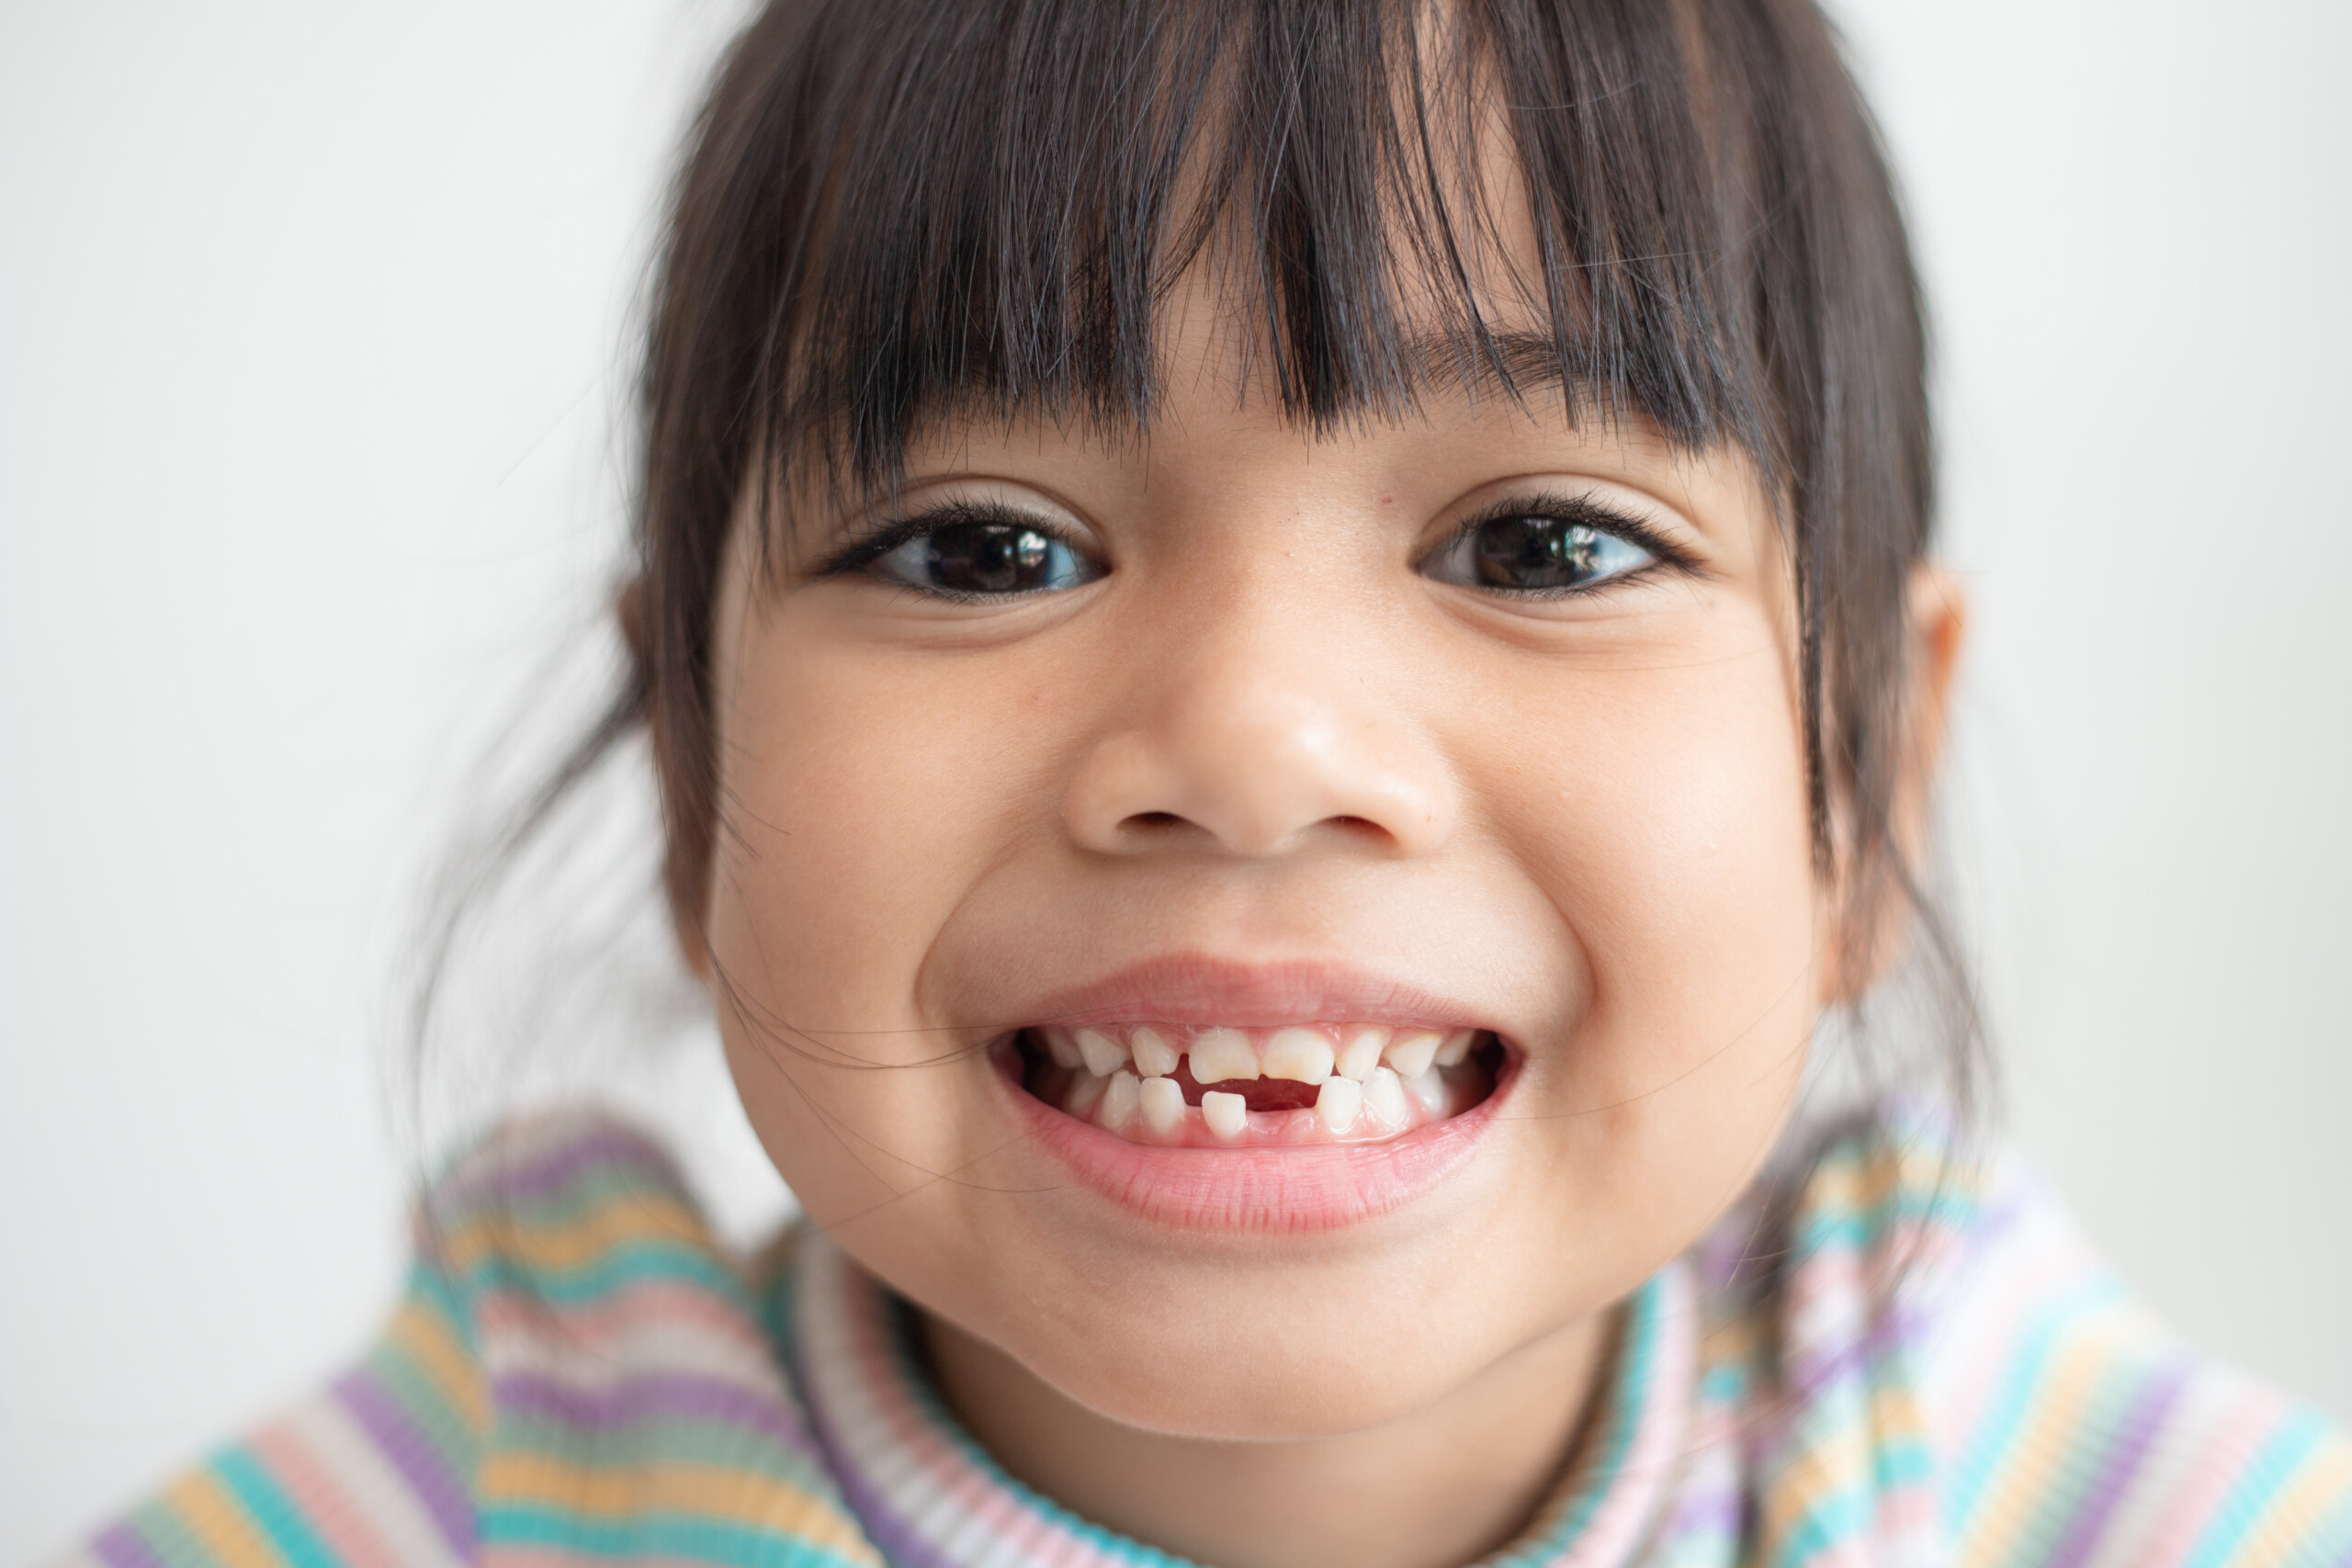 Little girl Tooth Decay - Pulpotomy Treatment